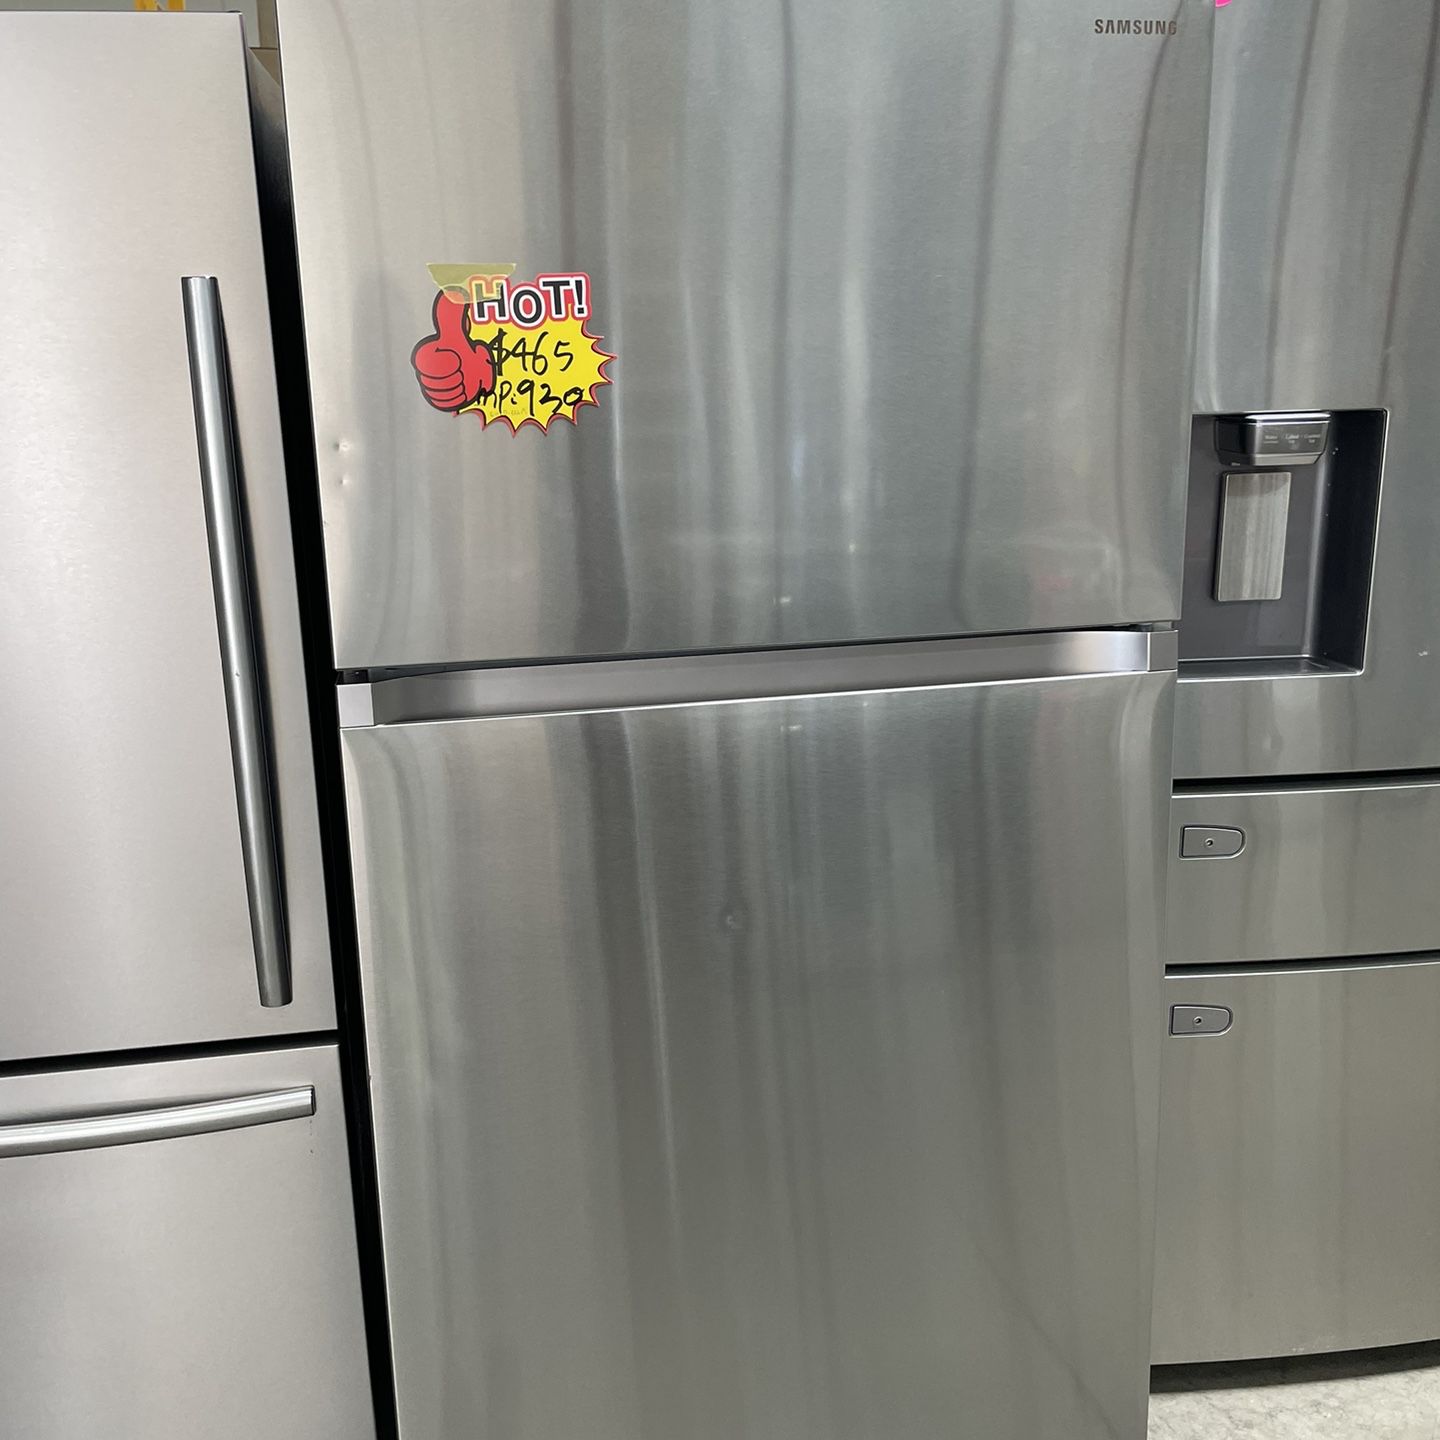 Samsung 33 in. 21 cu. ft. Top Freezer Refrigerator with FlexZone and Ice Maker in Fingerprint-Resistant Stainless Steel